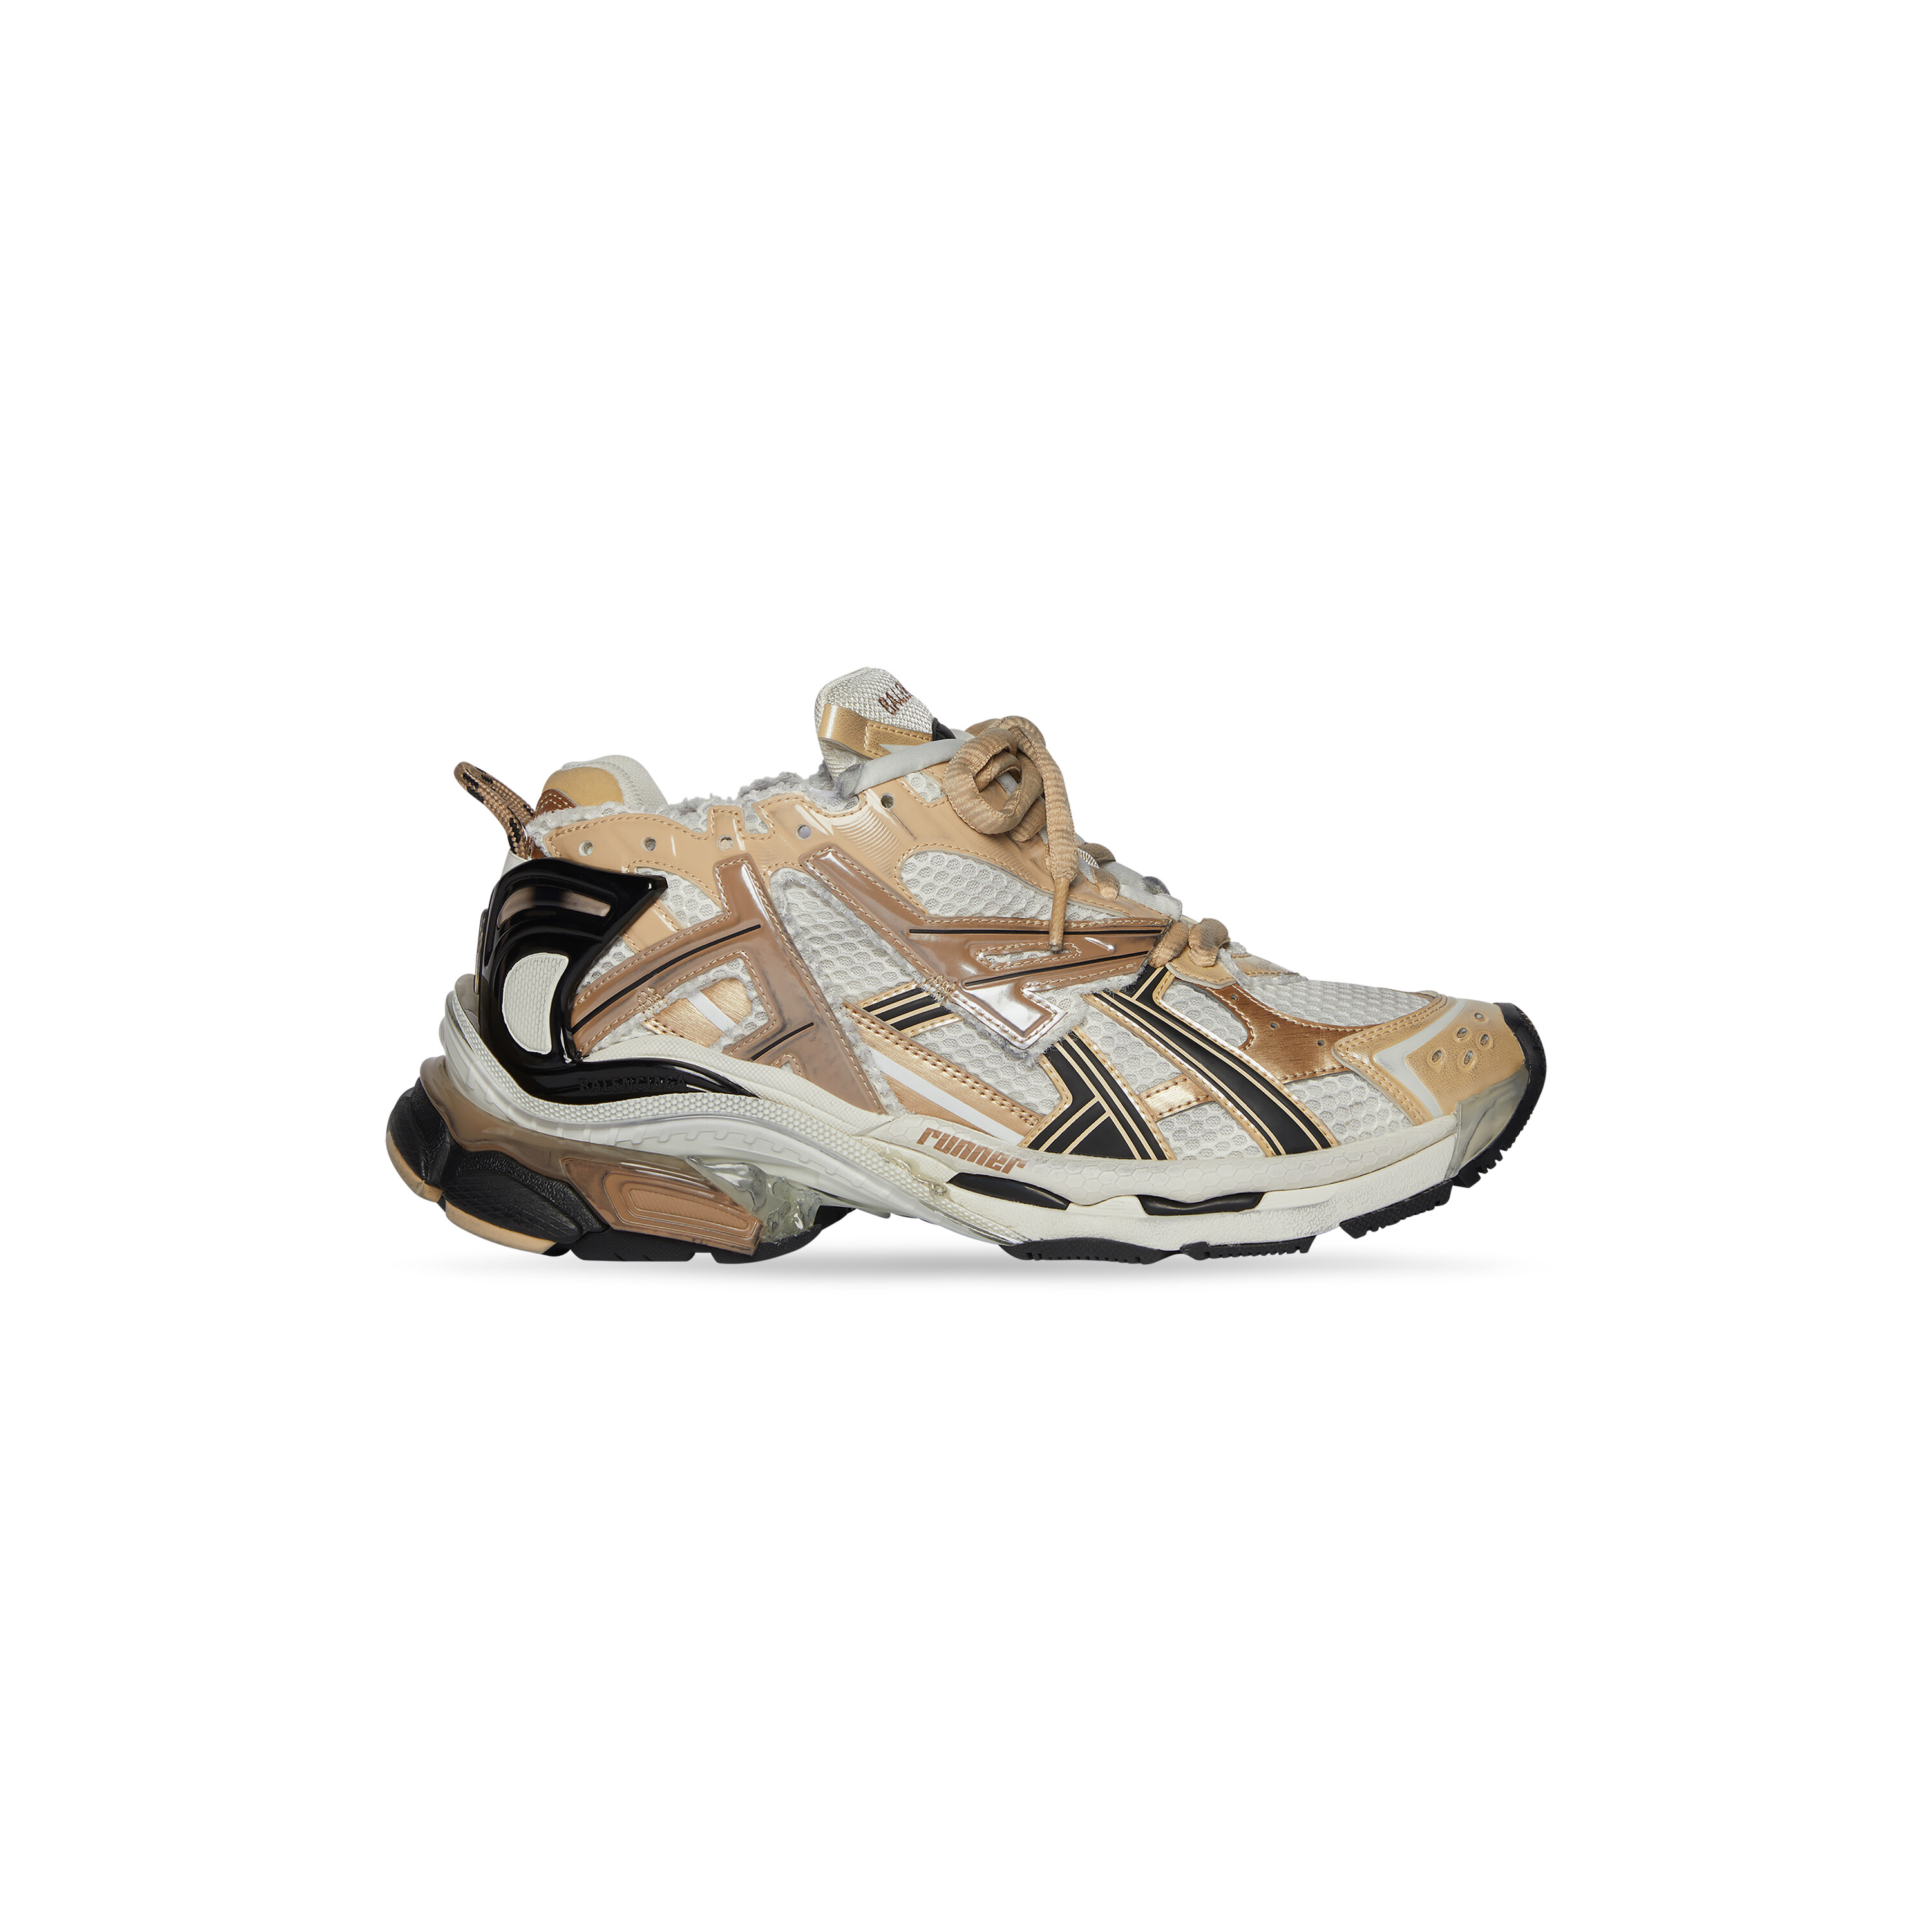 Balenciaga Drops WornOut Sneakers Covered in Dirt  Dust  Footwear News